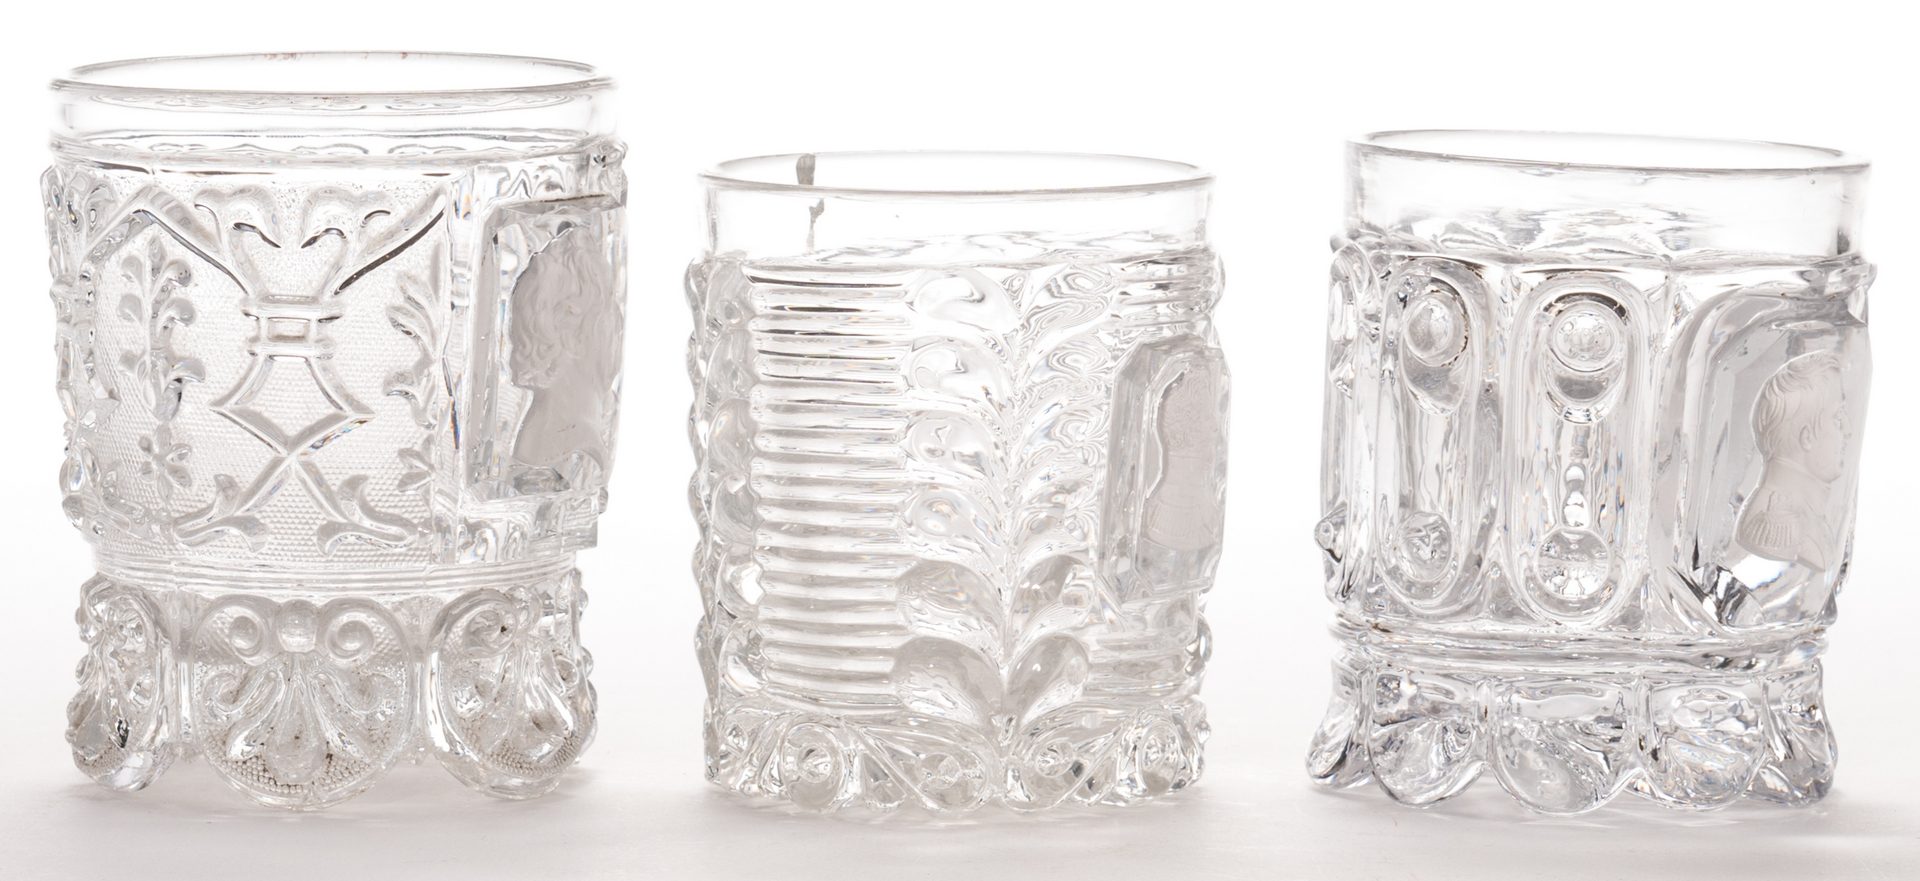 Lot 634: 3 French Sulfide Glass Tumblers